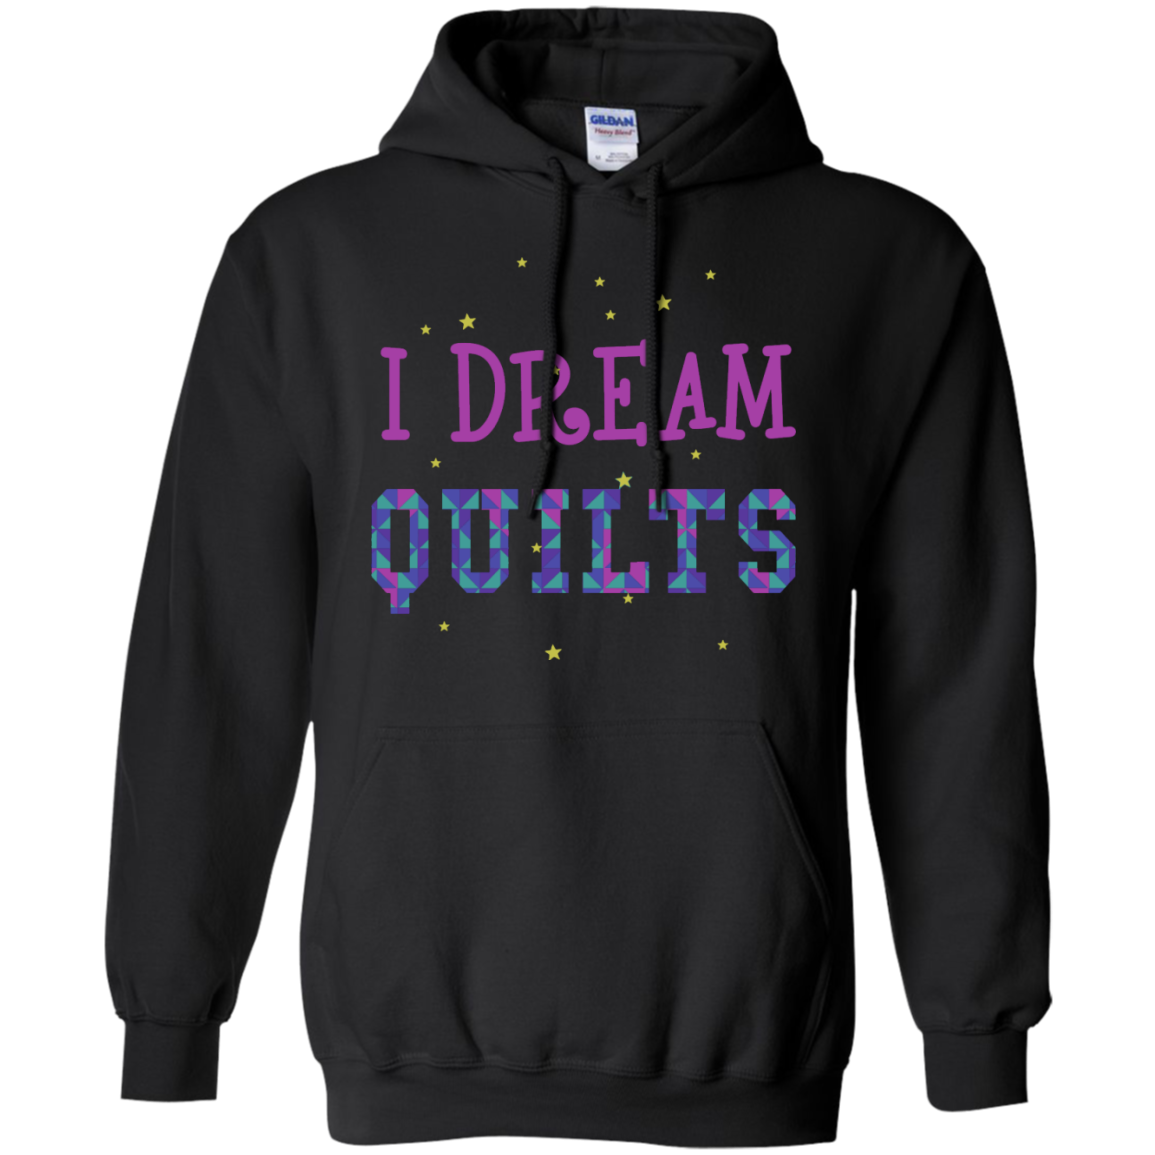 I Dream Quilts Pullover Hoodie - Crafter4Life - 4